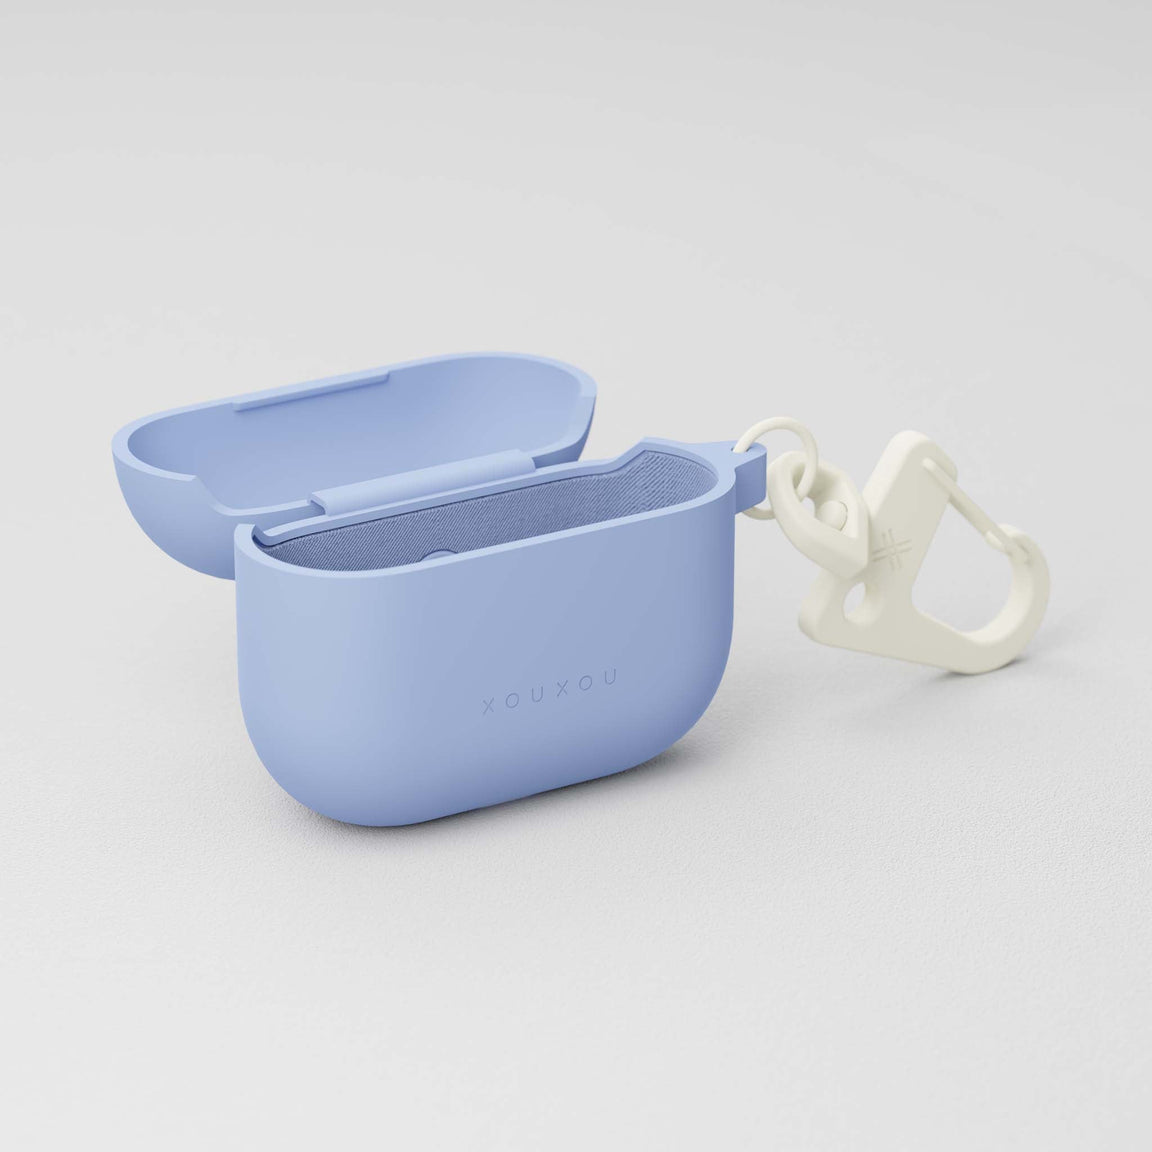 Apple AirPods case 3rd generation in Baby Blue with carabiner hook in white | XOUXOU